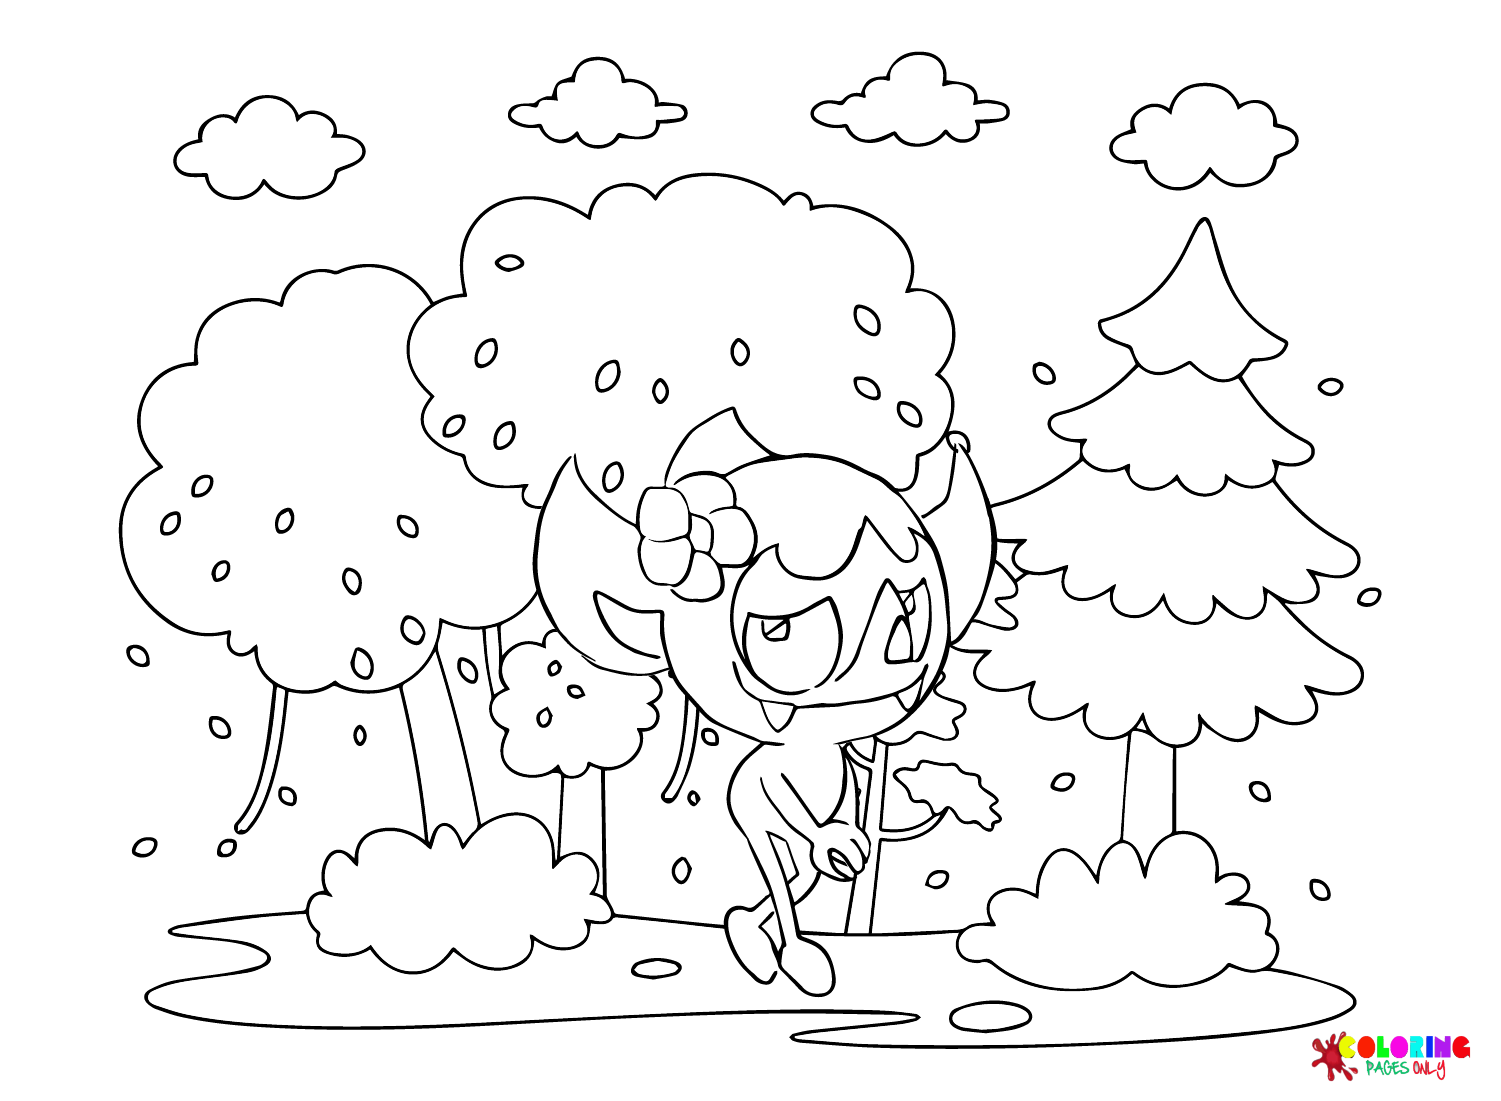 The Impidimp Coloring Page